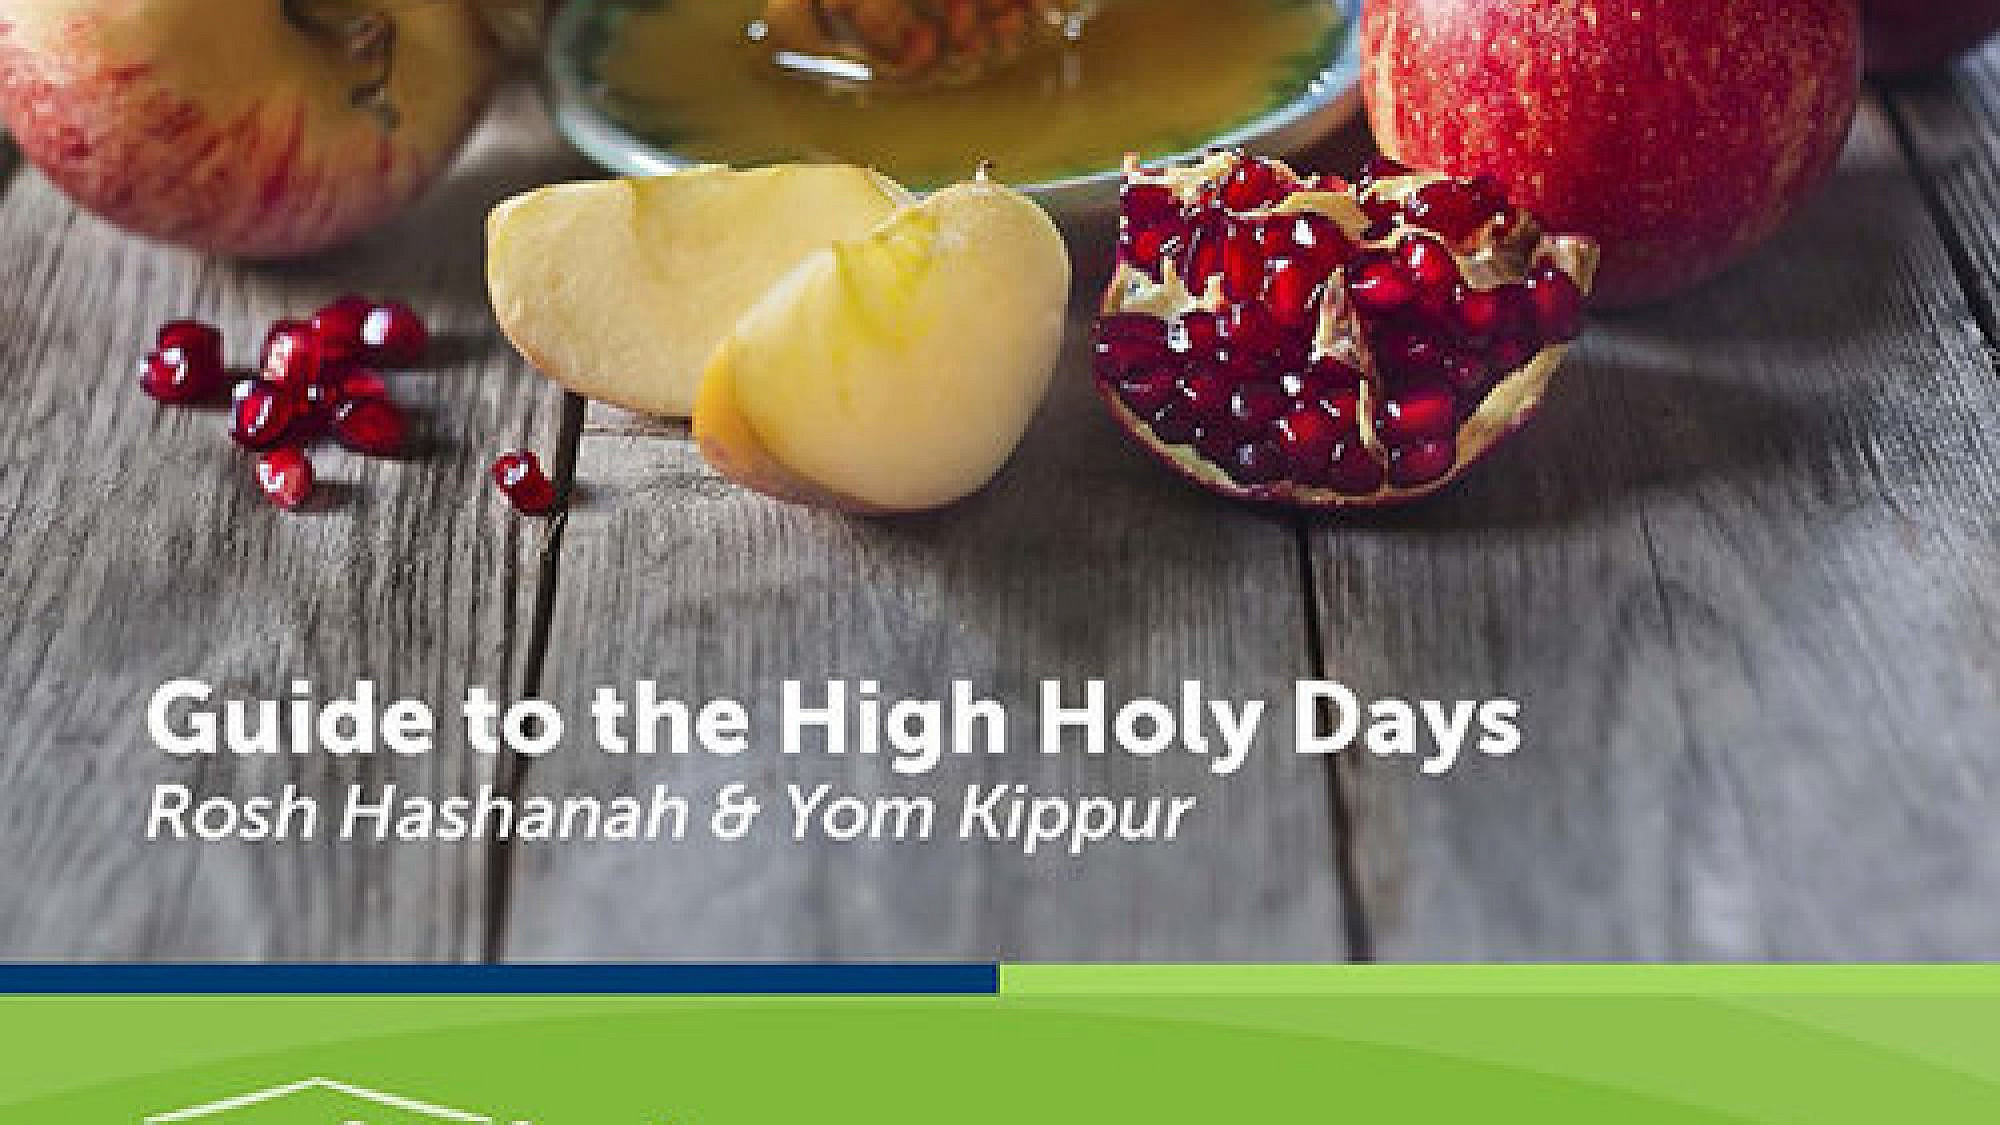 High Holidays stand alone on the calendar for interfaith families but